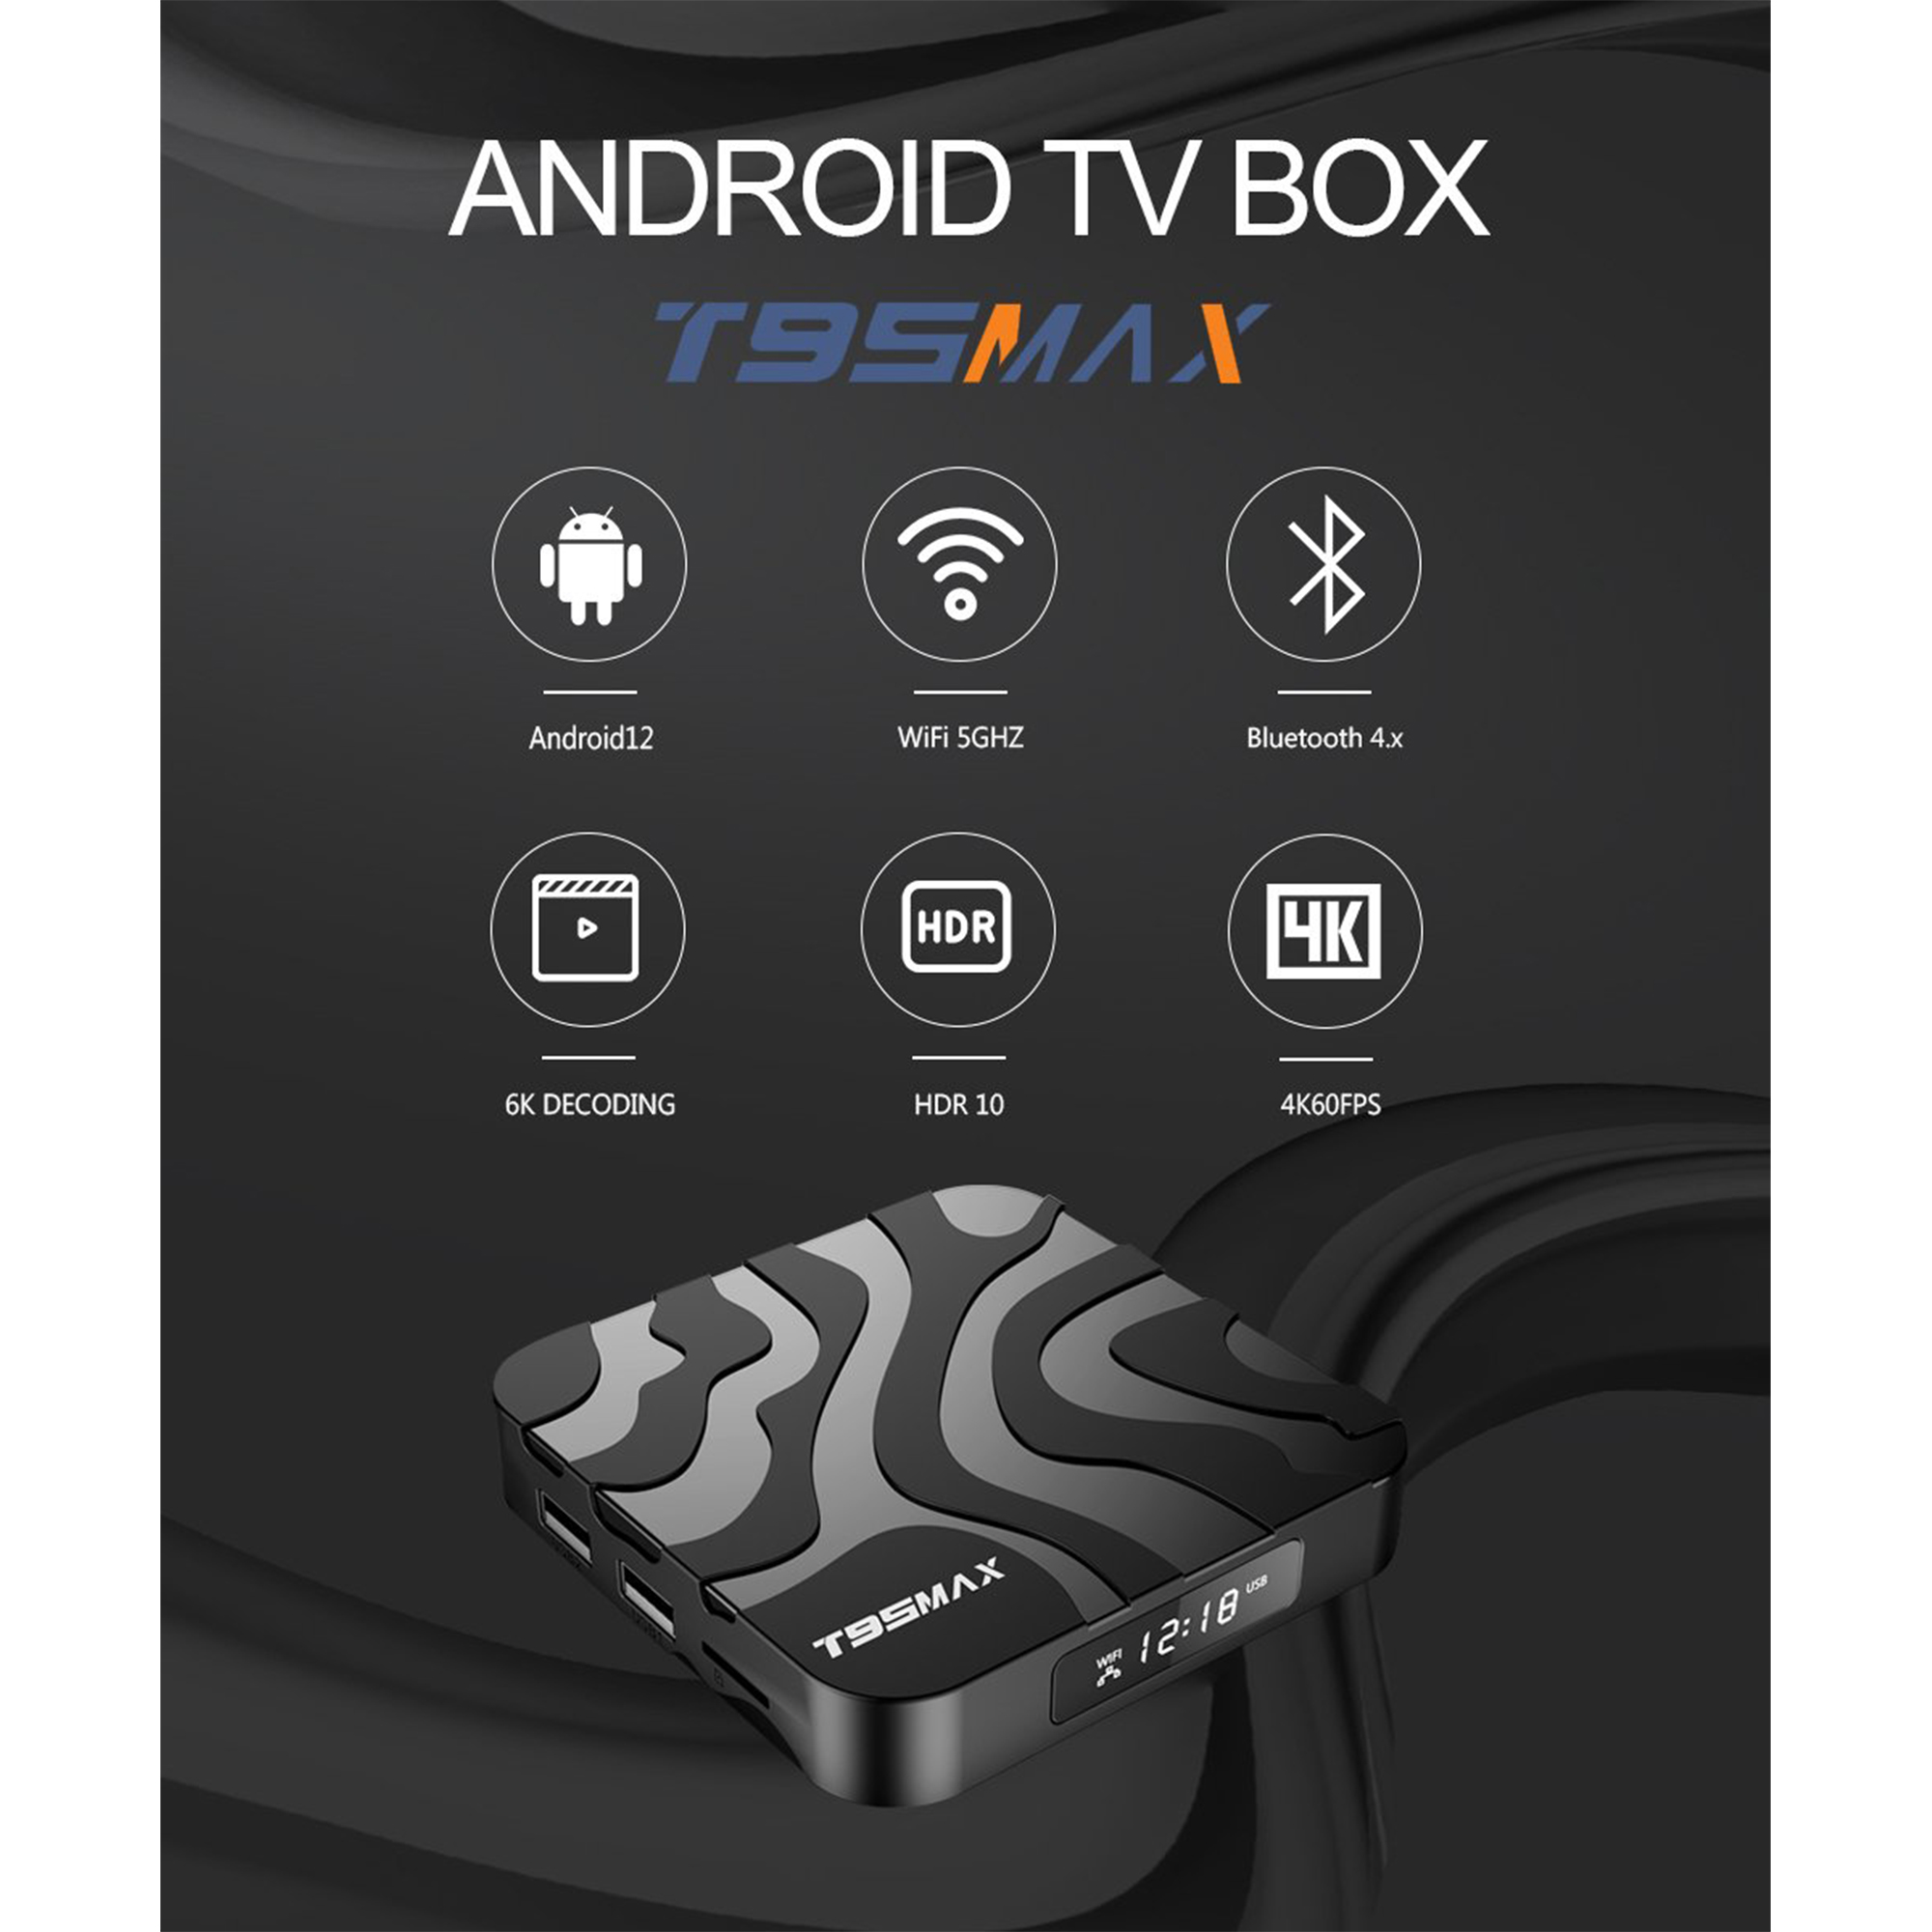 LIPA T95 Max Android 16 box Multimedia Tv Black player, 12 GB Android